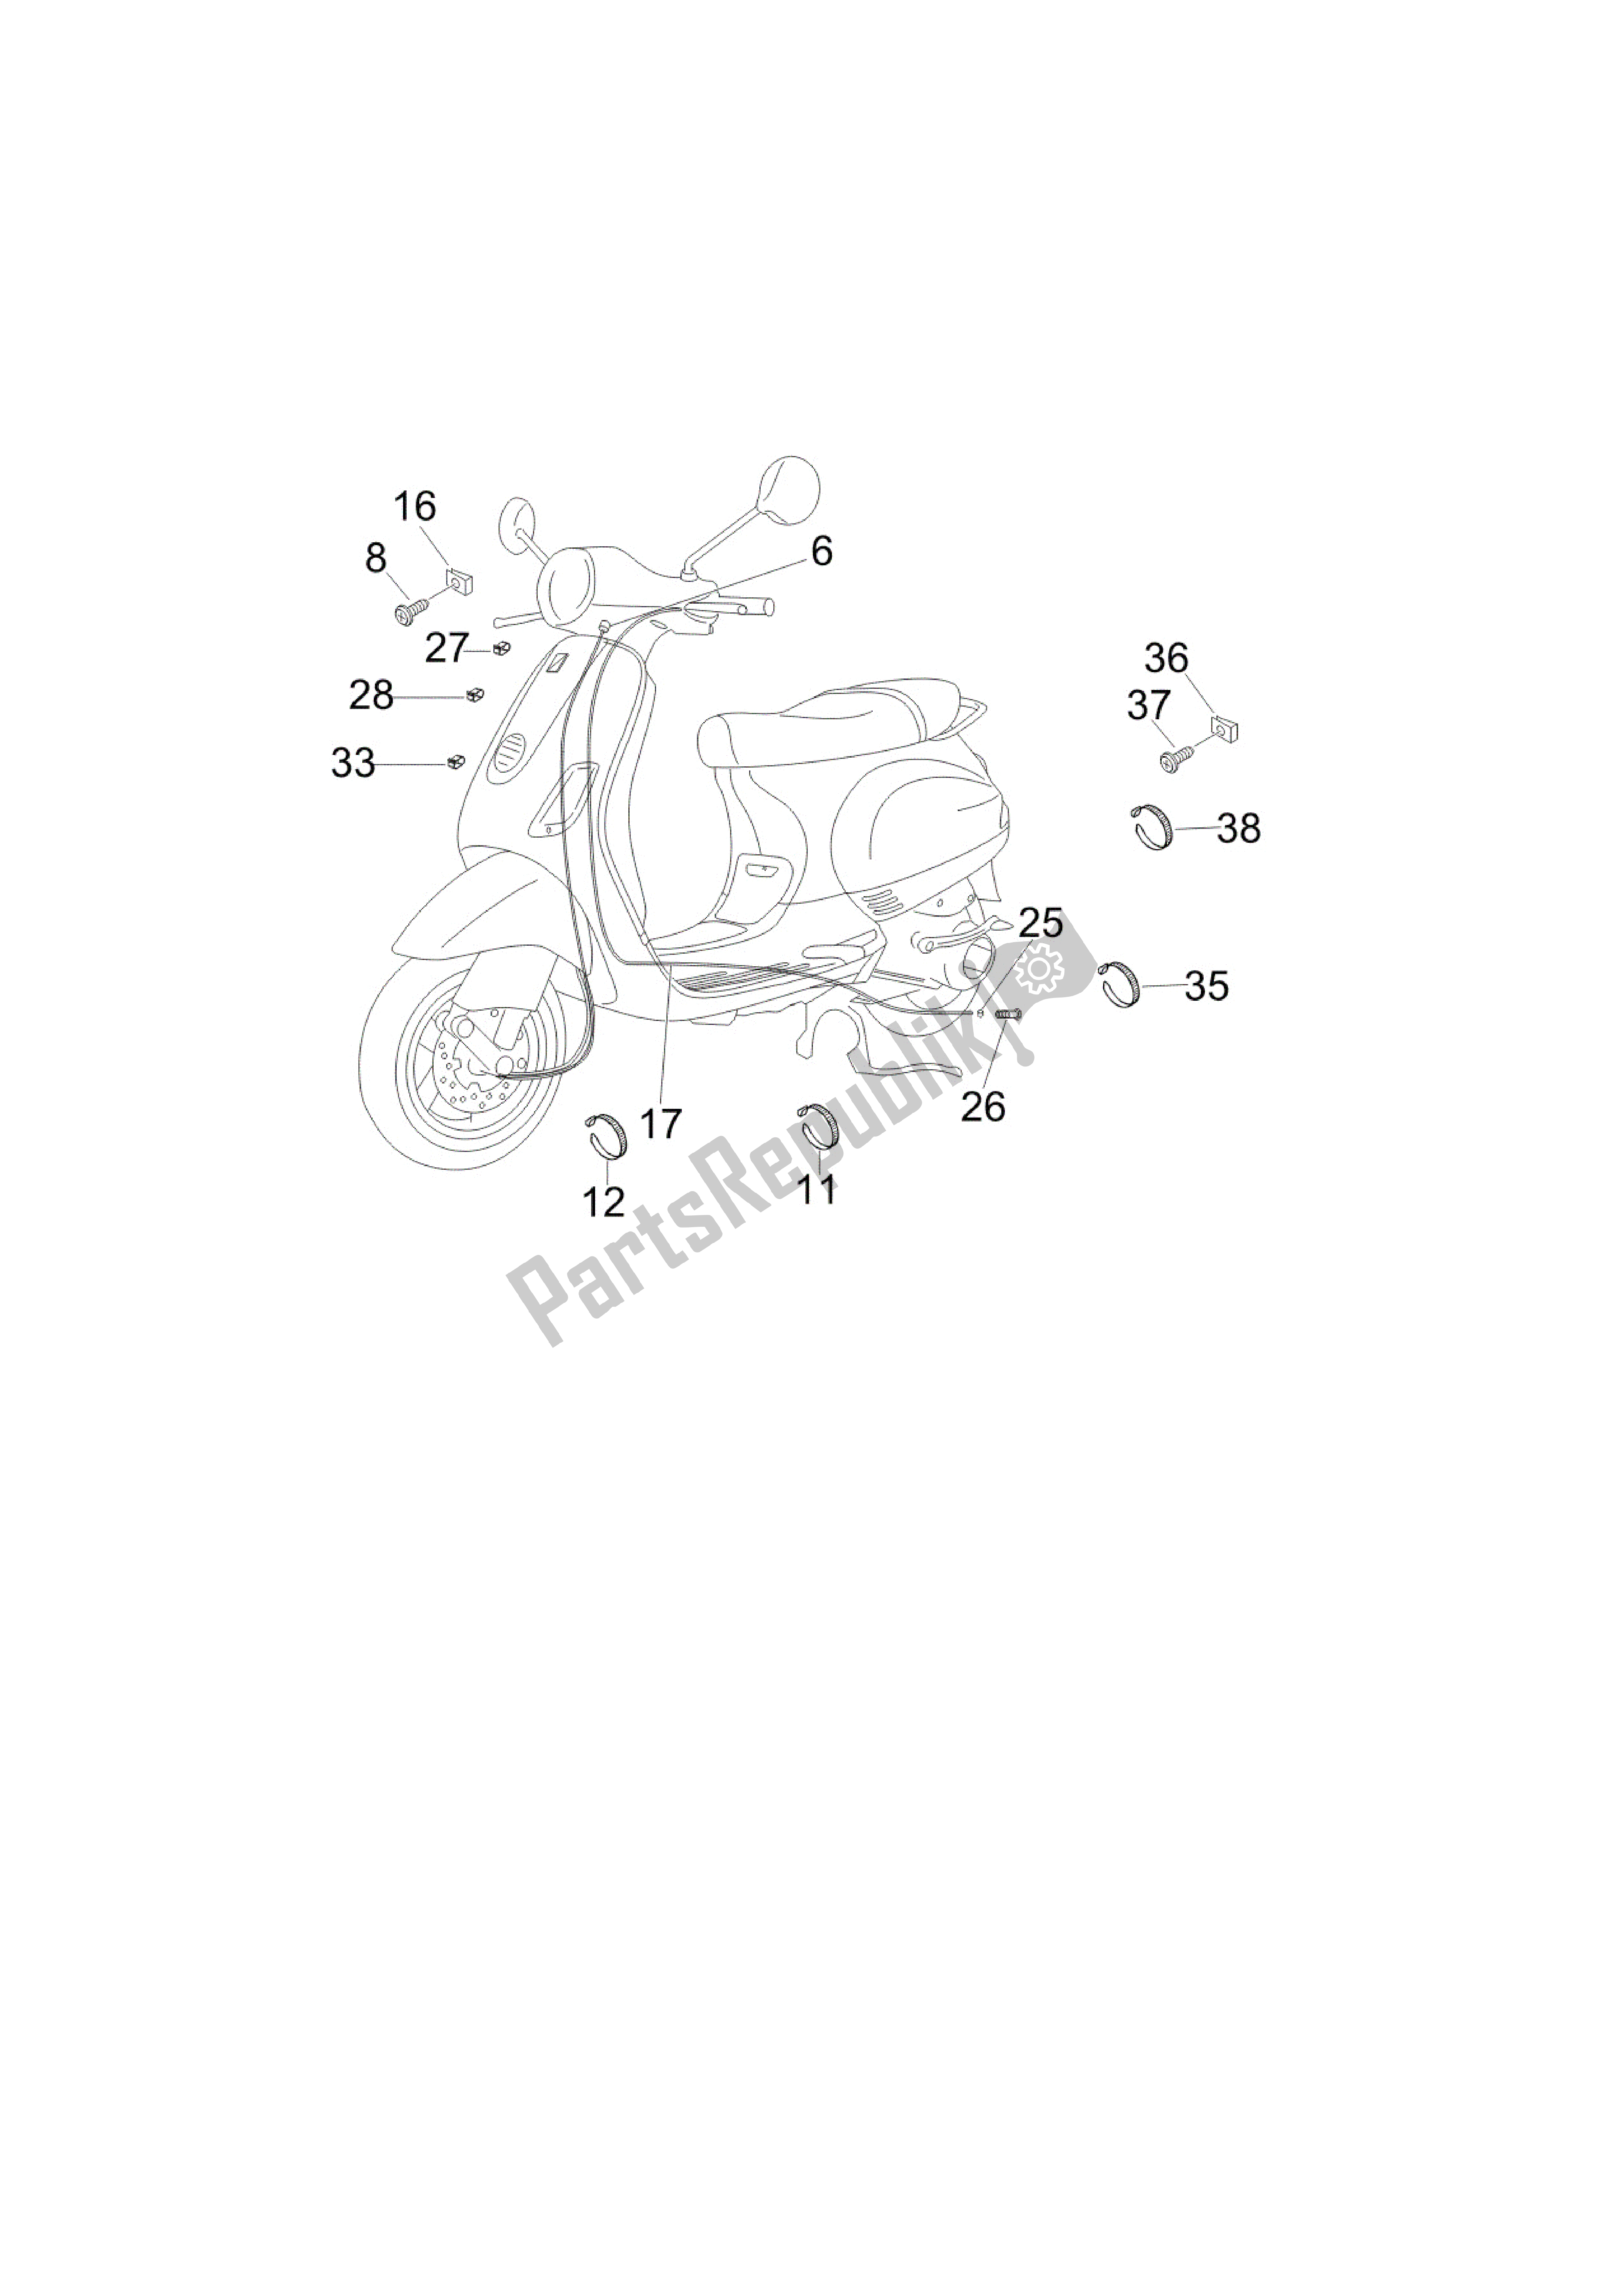 All parts for the Transmisiónes of the Vespa LX 150 2005 - 2006